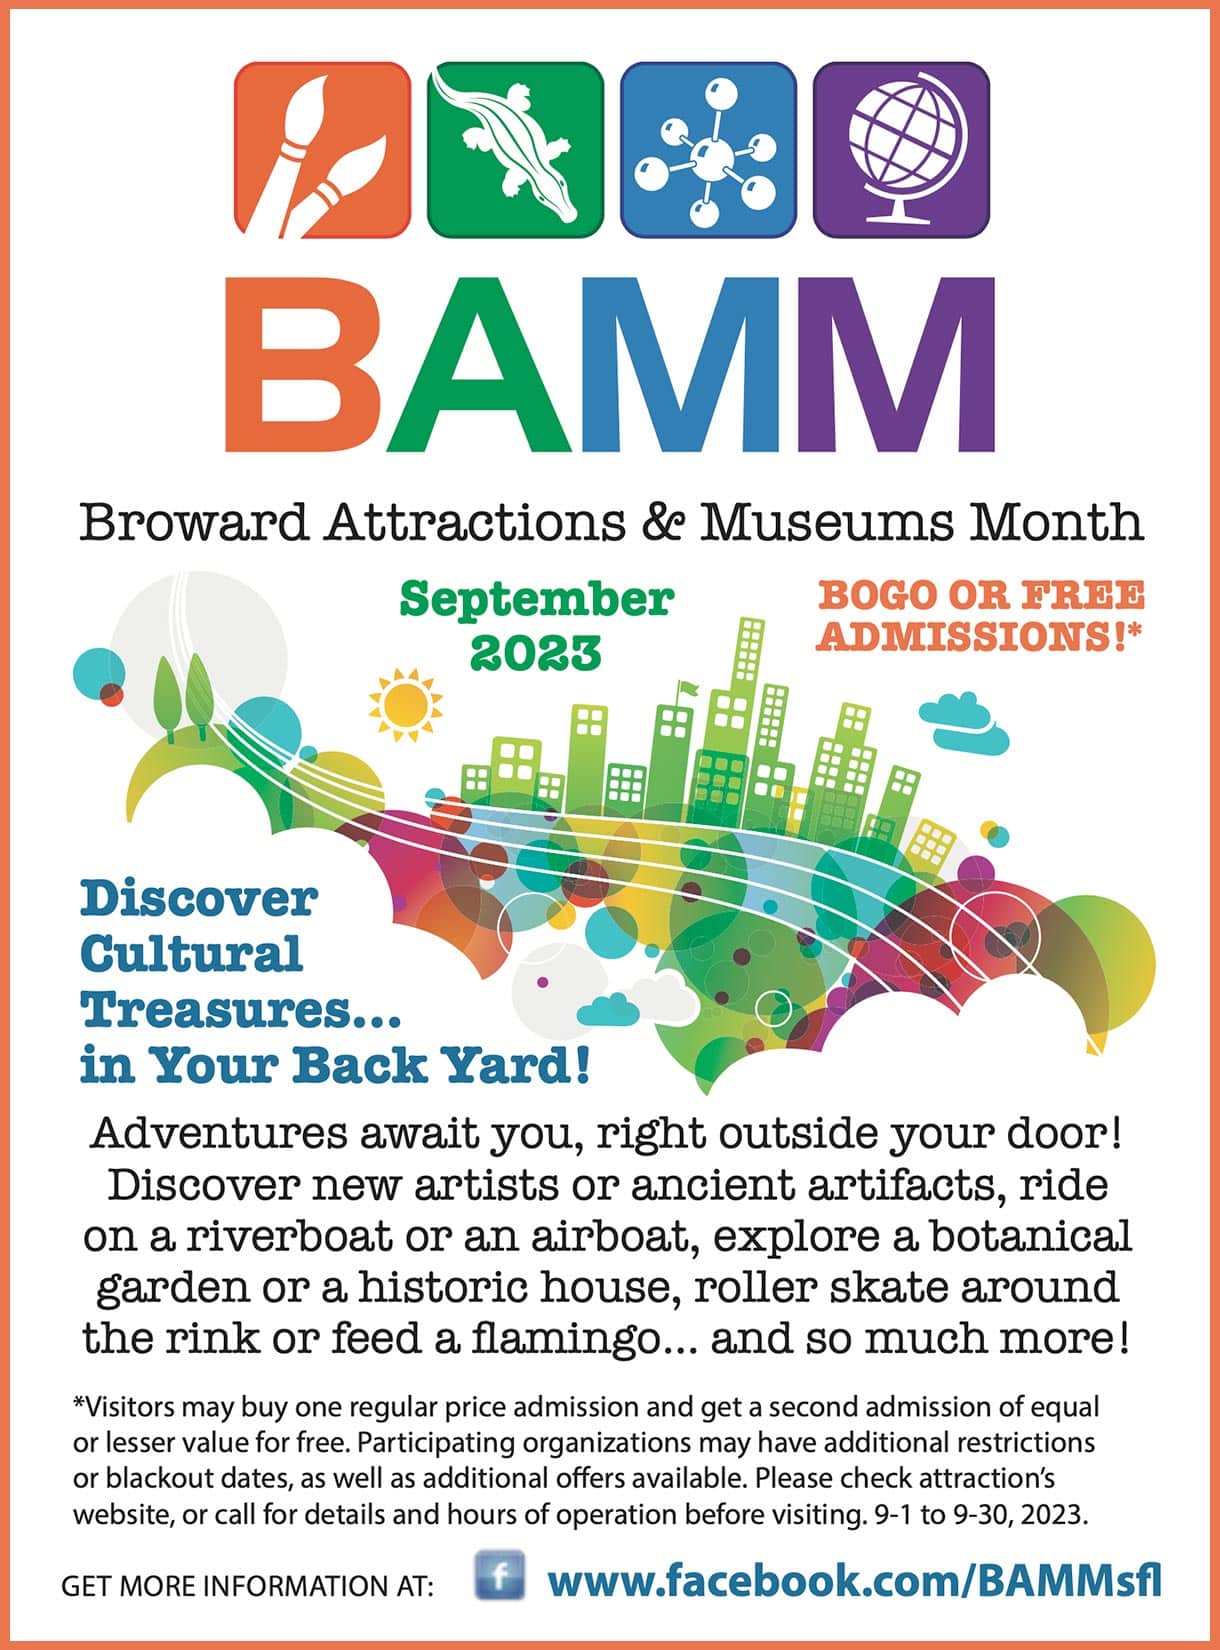 Broward Attractions and Museums Month (BAMM 2023) - September 1-30, 2023